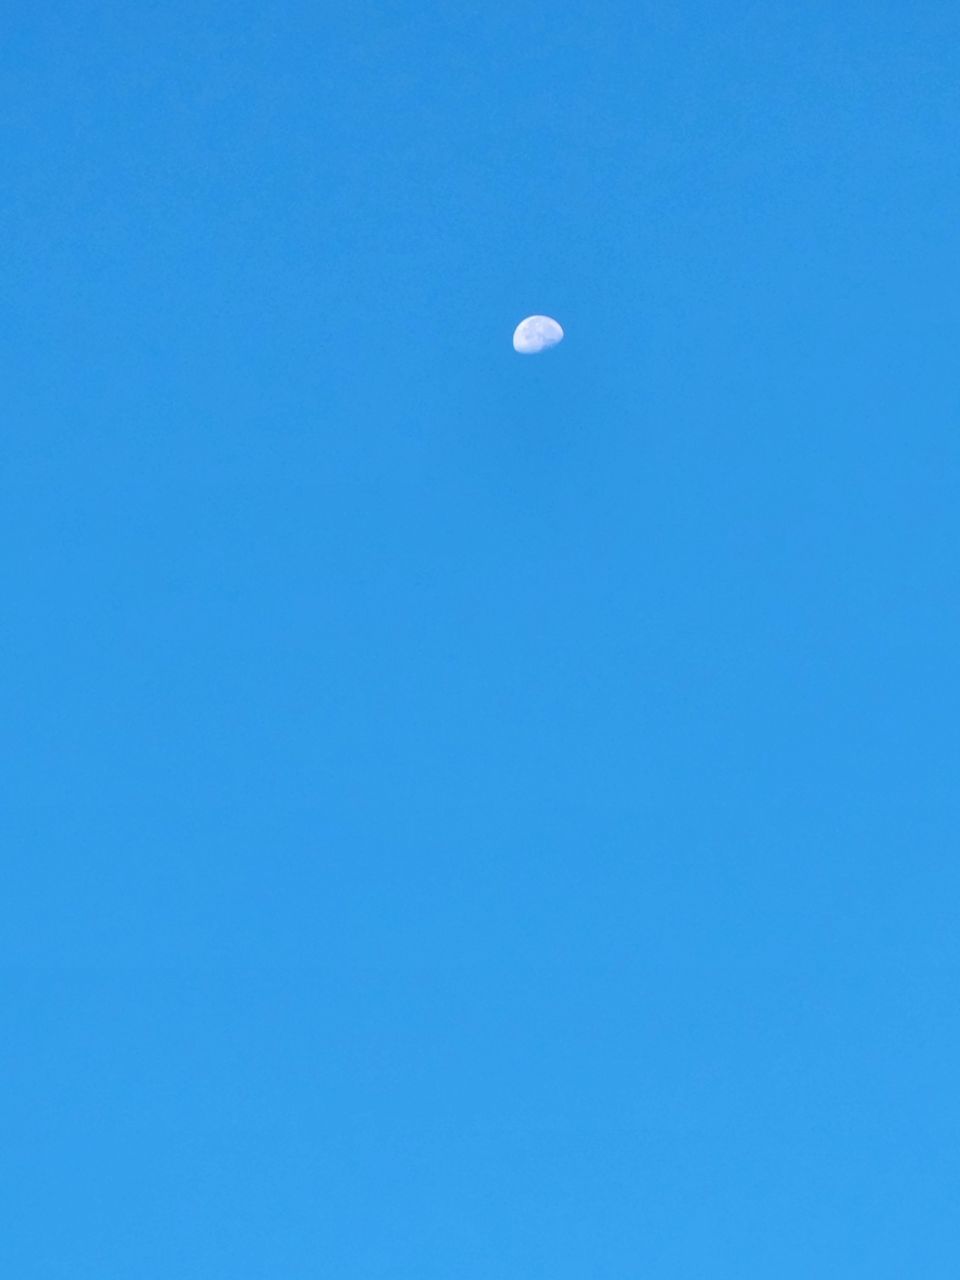 sky, blue, moon, clear sky, copy space, space, no people, beauty in nature, nature, low angle view, tranquility, scenics - nature, tranquil scene, astronomy, night, outdoors, idyllic, crescent, half moon, astronomical object, cloud